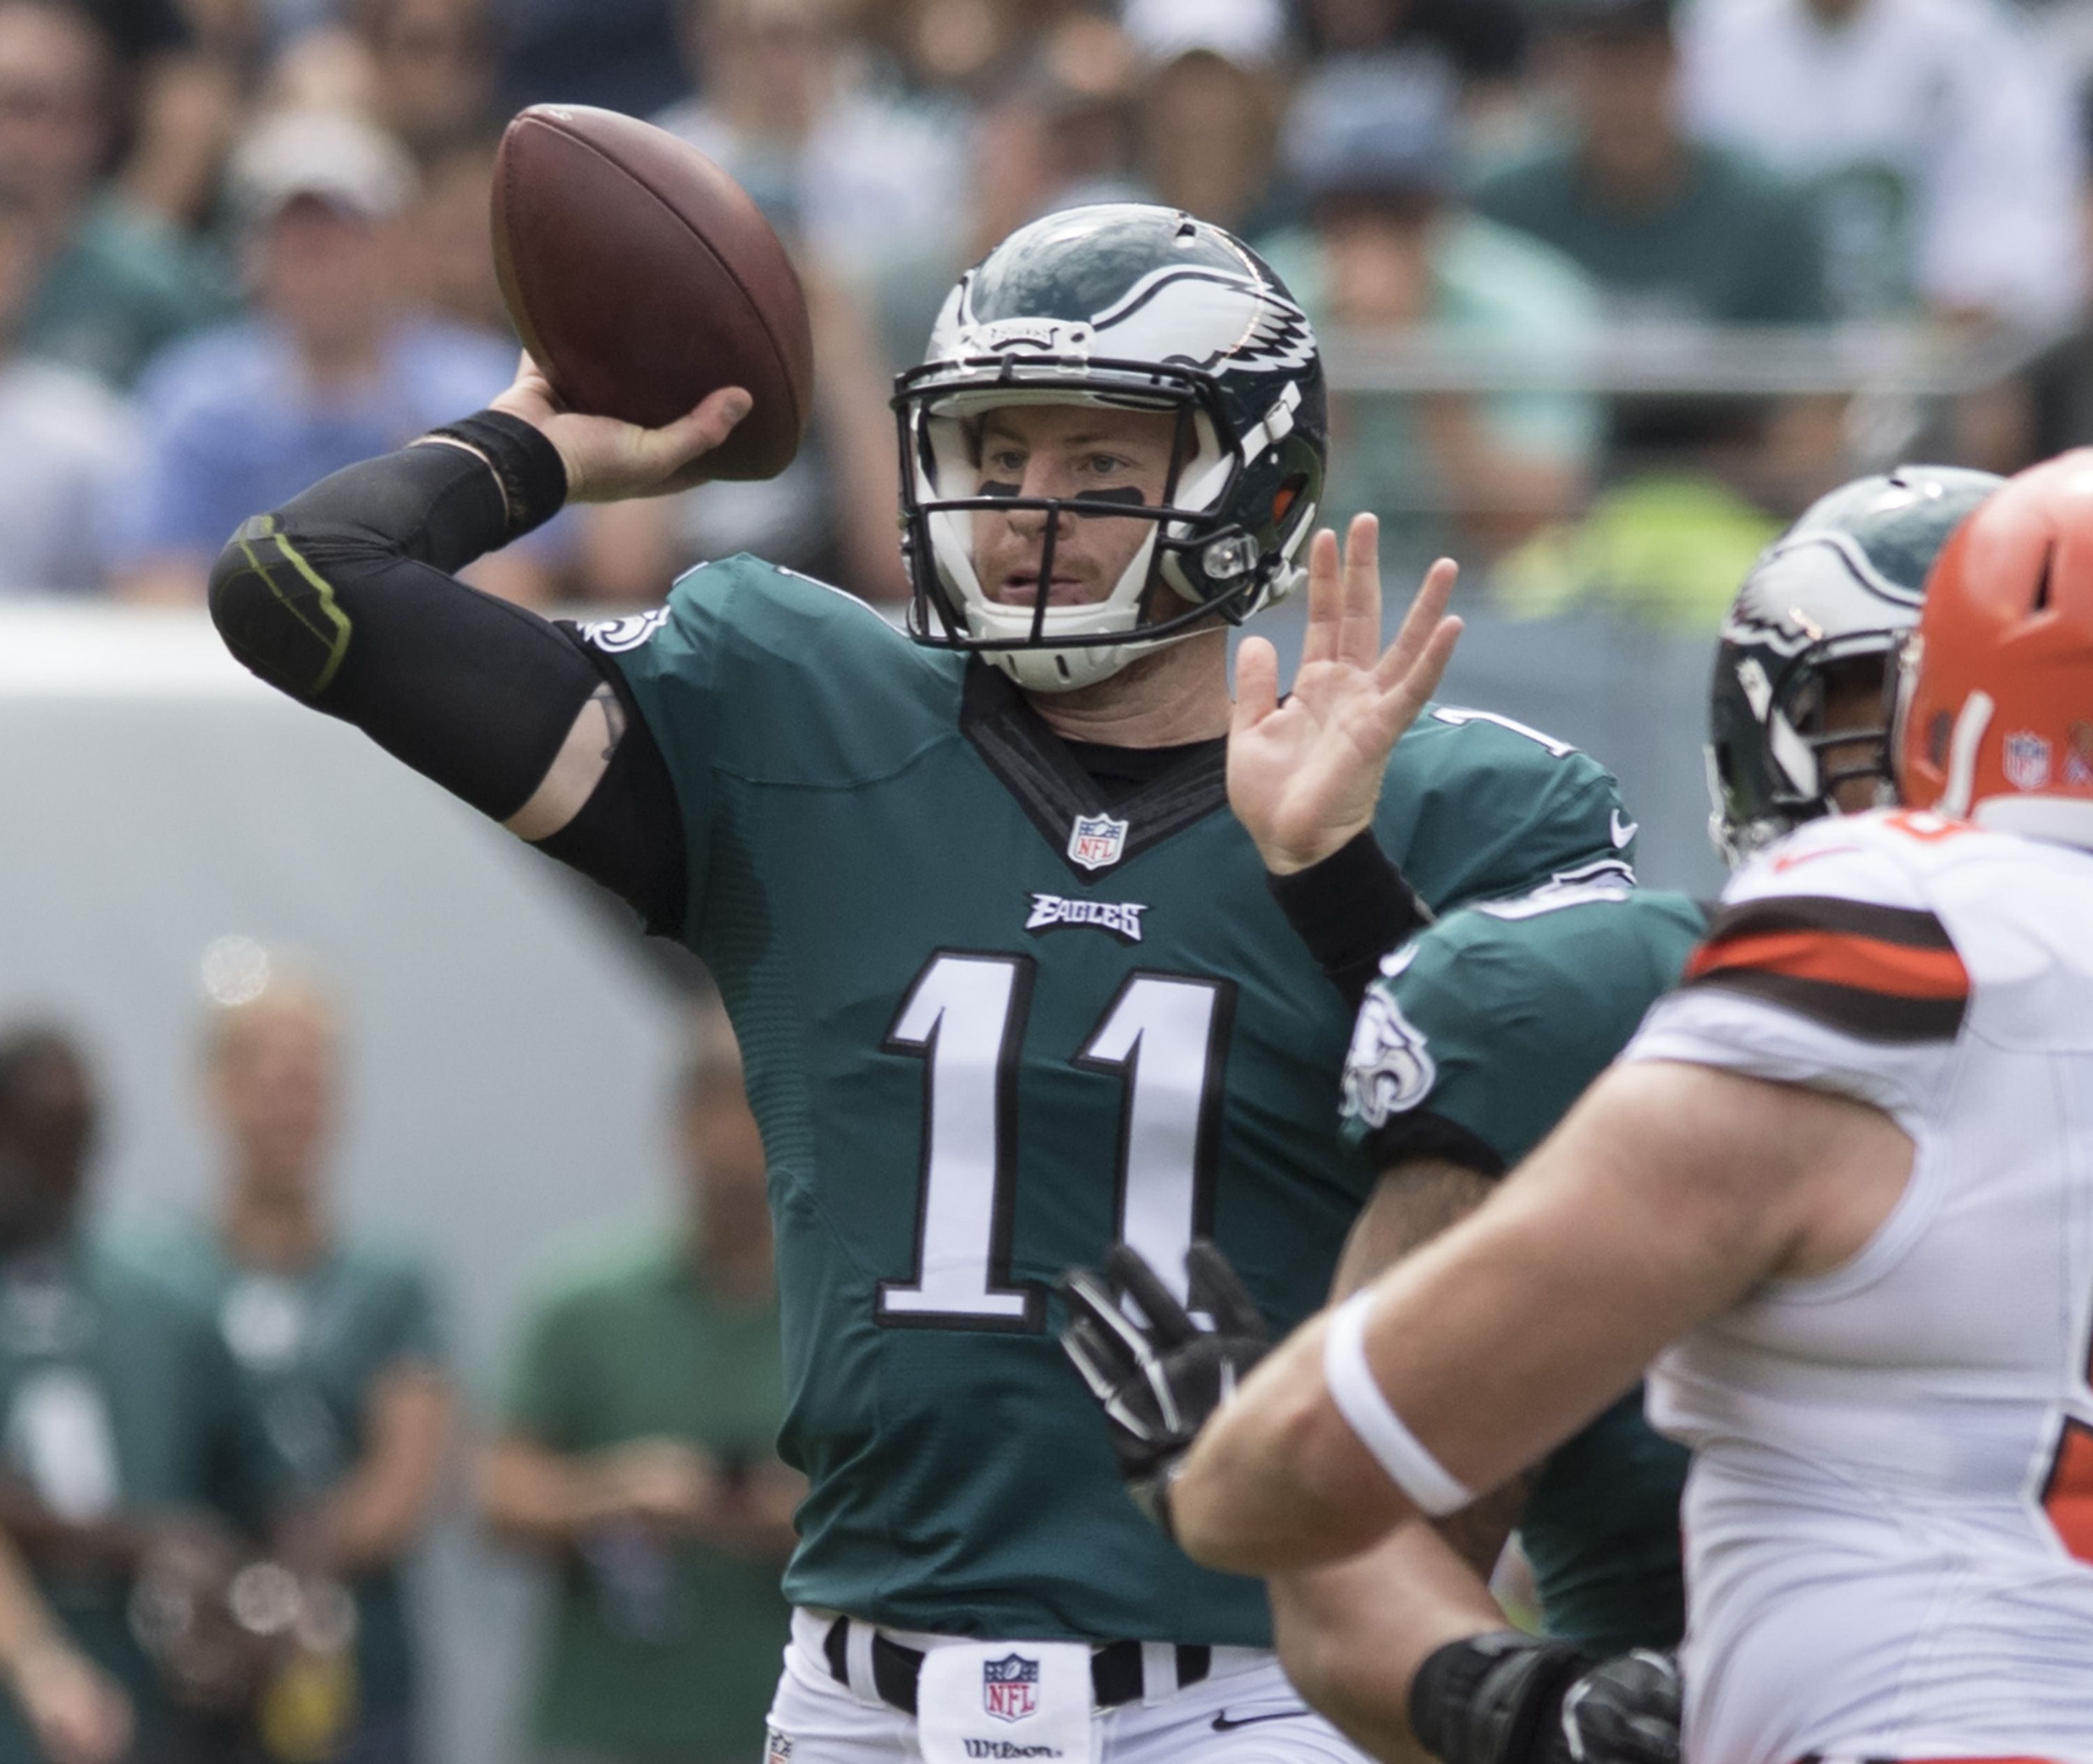 Philadelphia Eagles rookie quarterback Carson Wentz throws a pass against the Cleveland Browns on Sunday, Sept. 11, 2016, at Lincoln Financial Field in Philadelphia, Pa. The Eagles won 29-10. (Clem Murray/Philadelphia Inquirer/TNS)